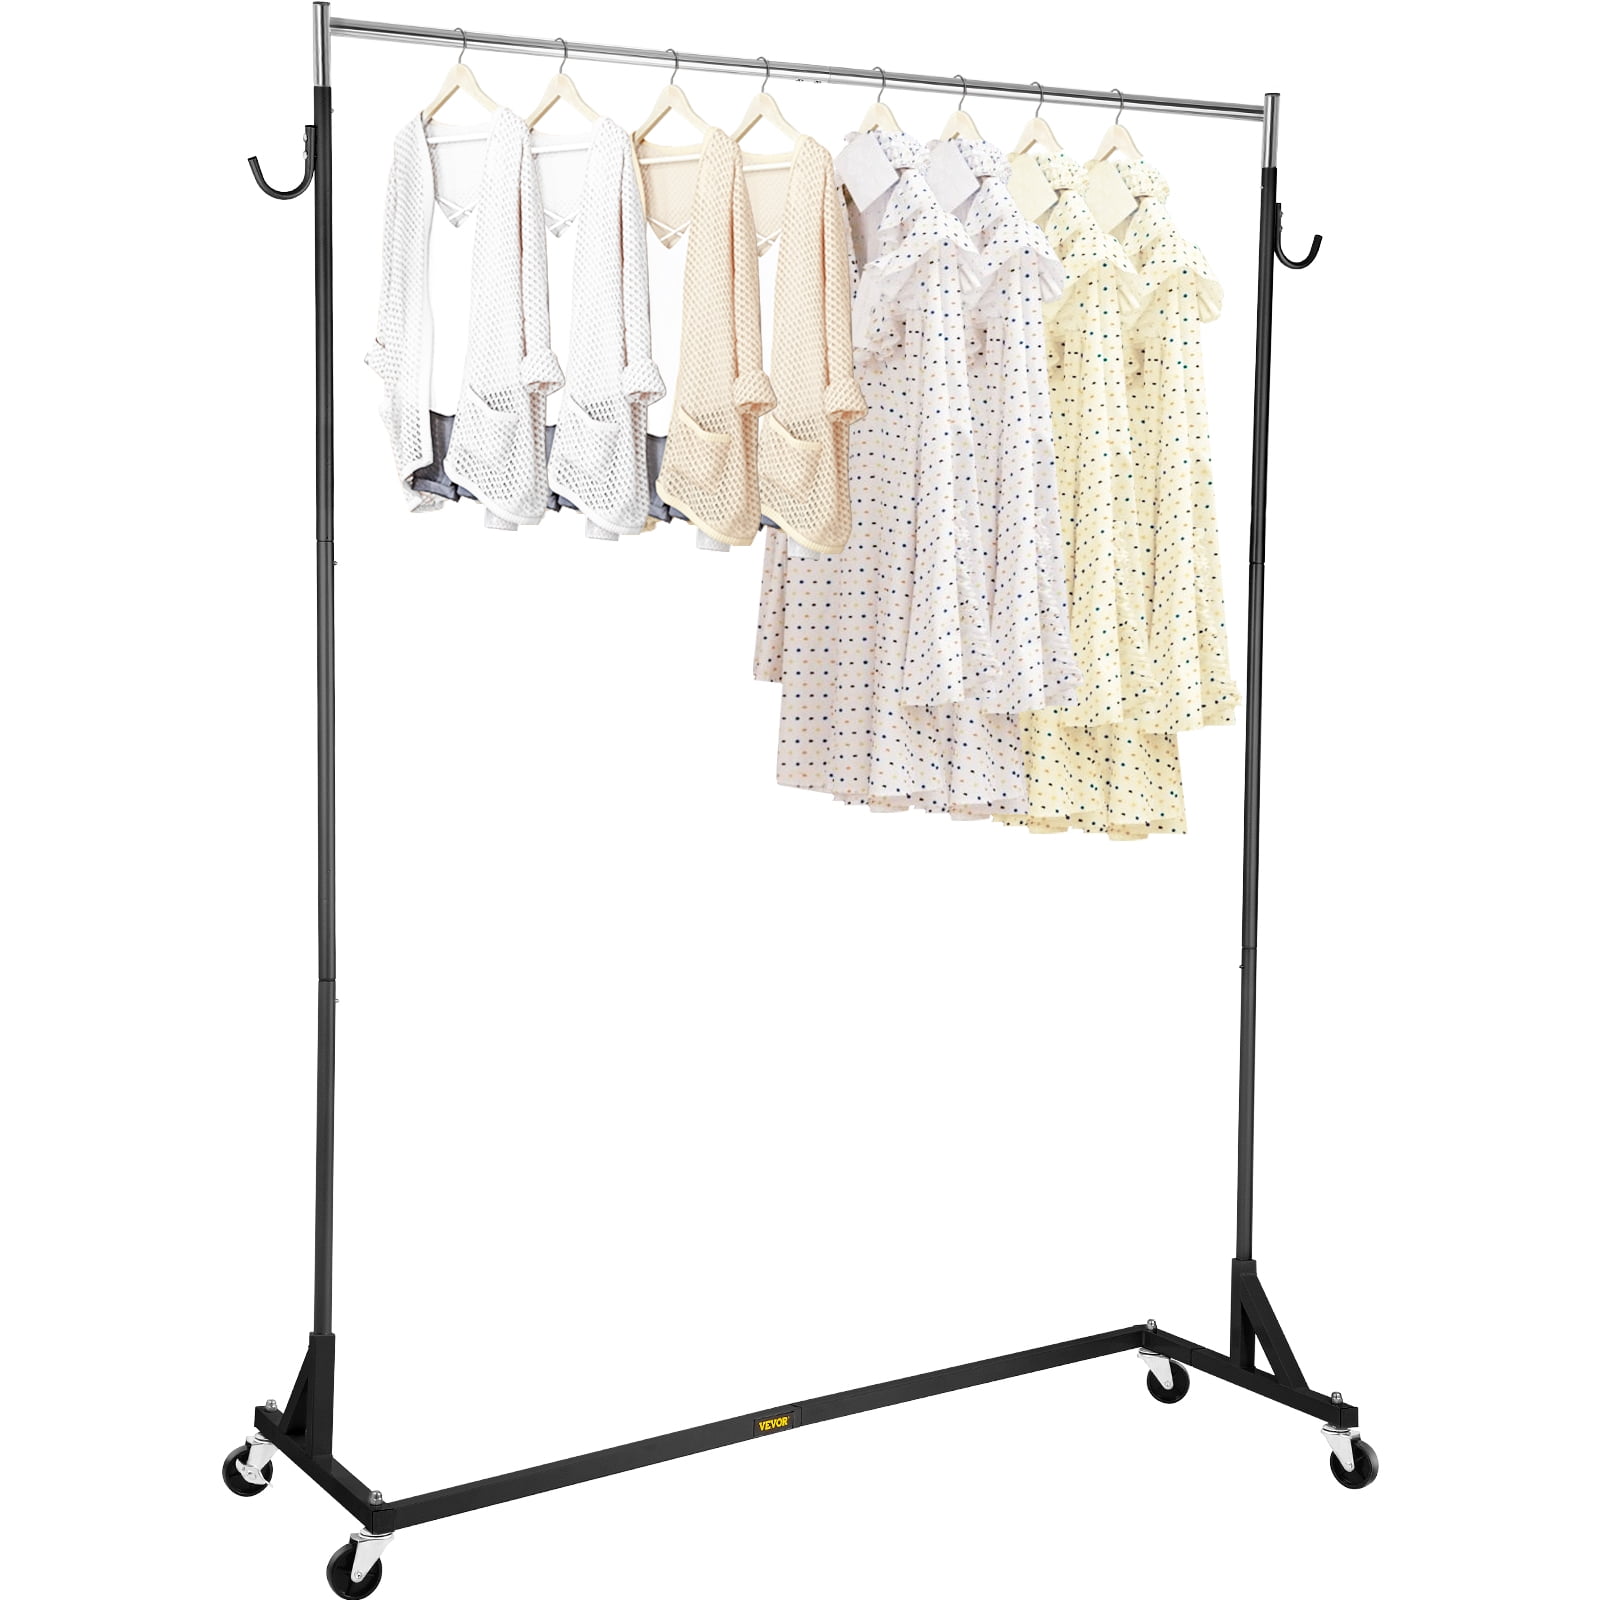 For Home or To Display in Shops Metal Industrial Garment Rail Clothes Coats 